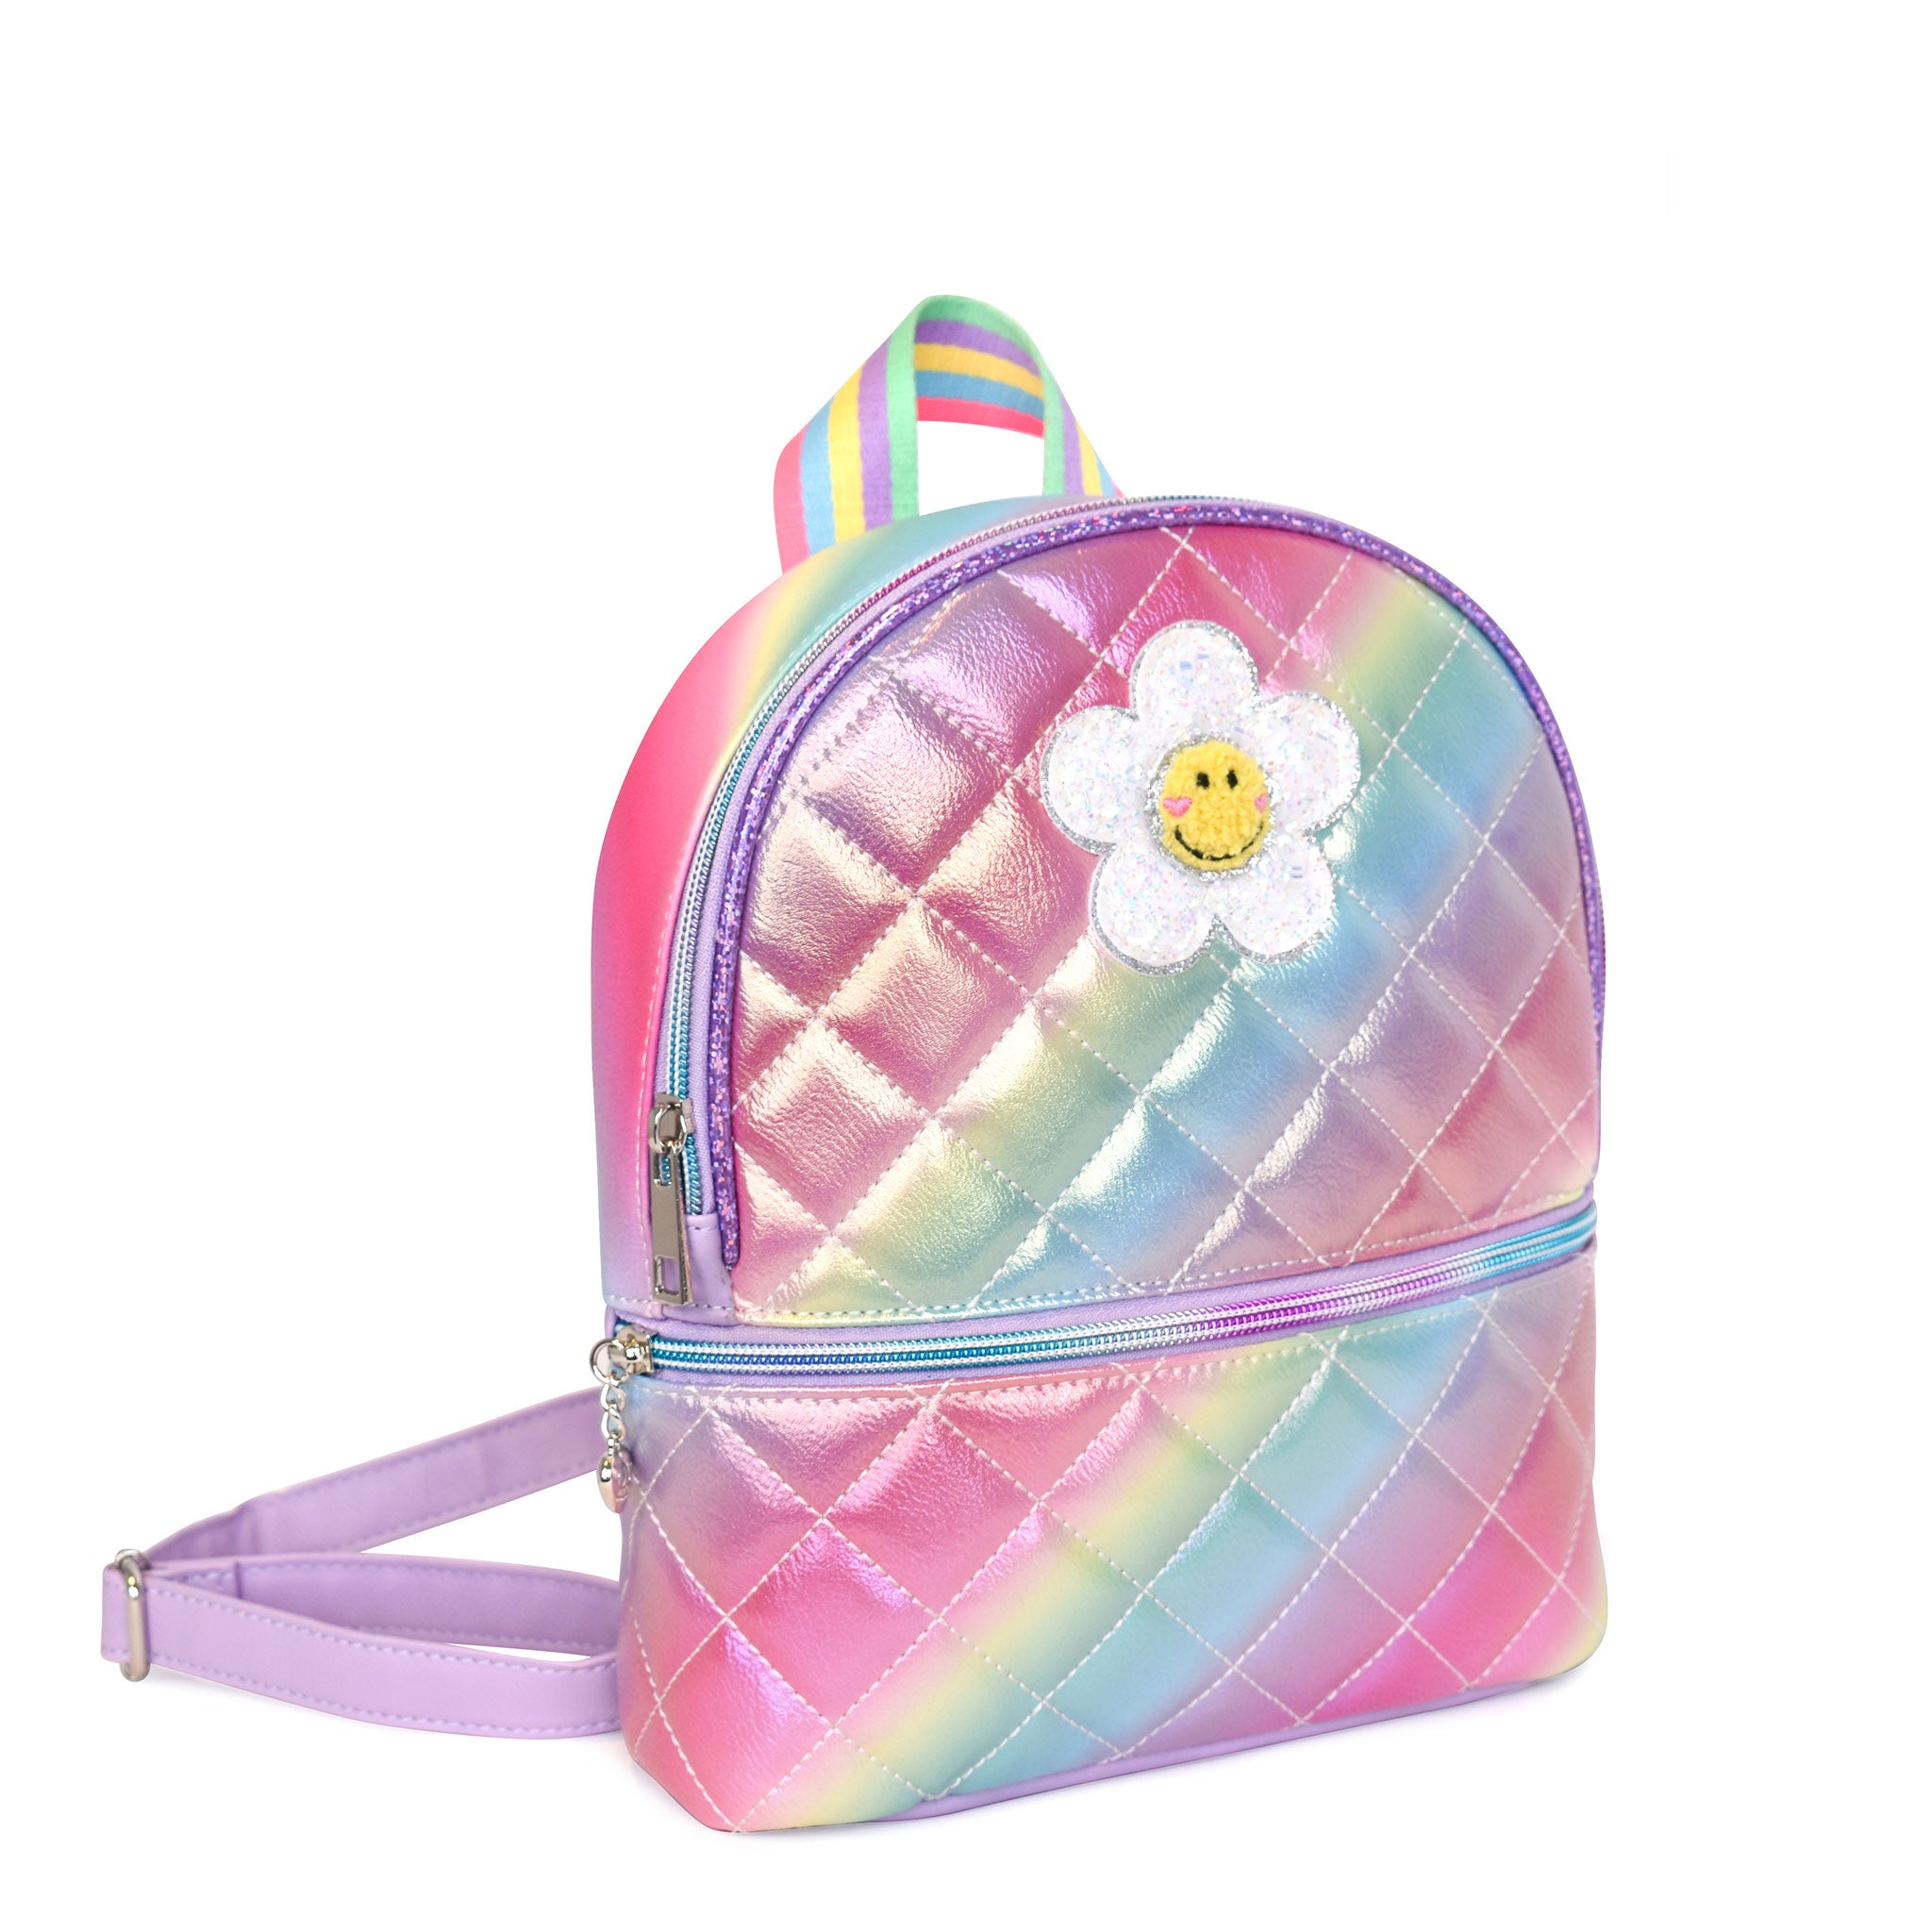 Side view of a rainbow ombre metallic quilted mini backpack with a glitter daisy appliqué